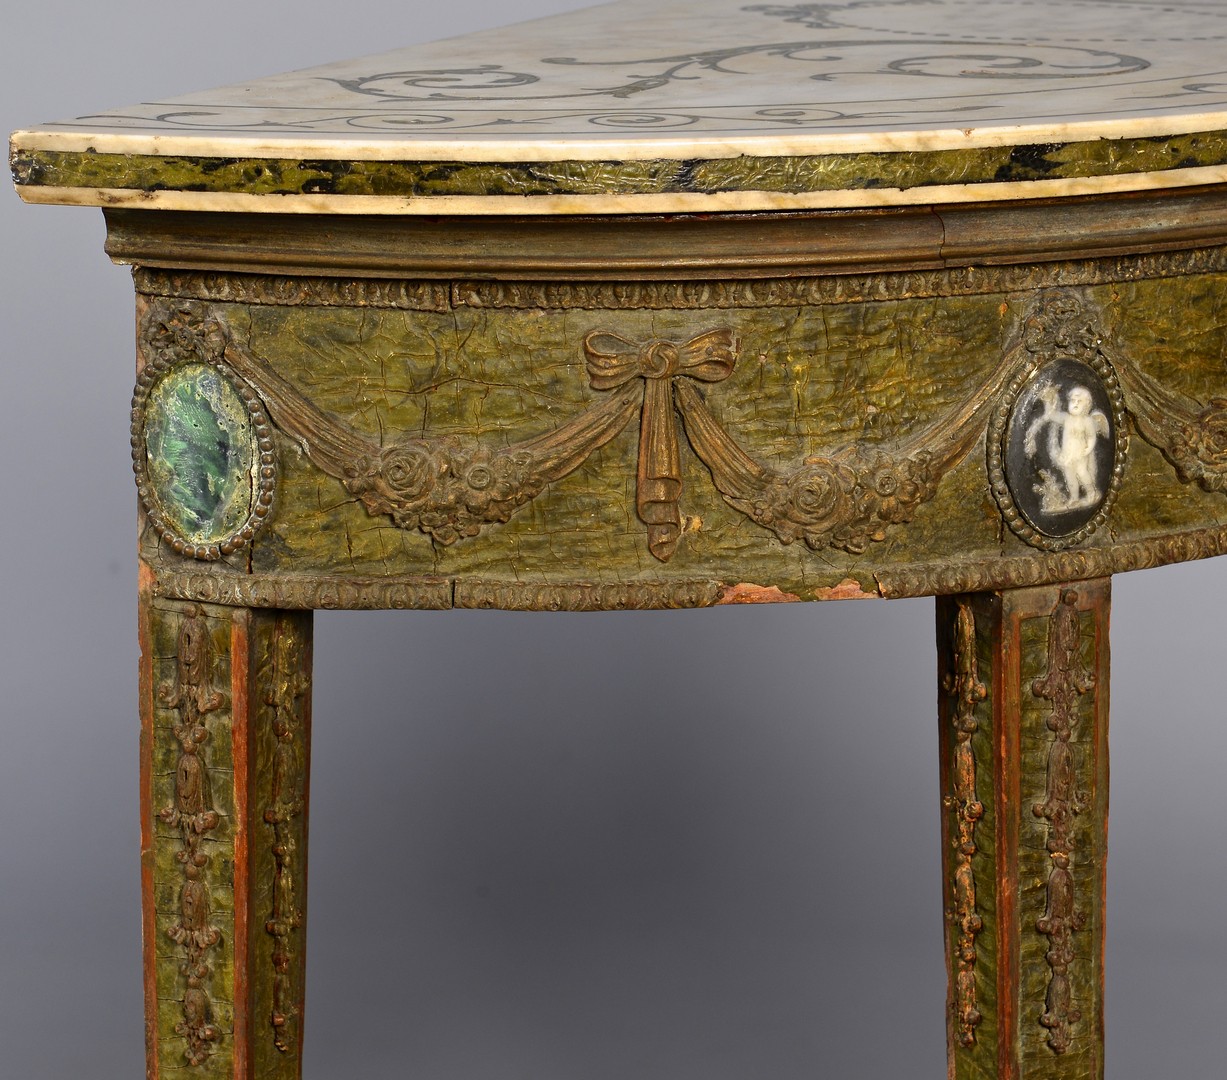 Lot 97: Adam Style Marble, Wedgwood Console Tables